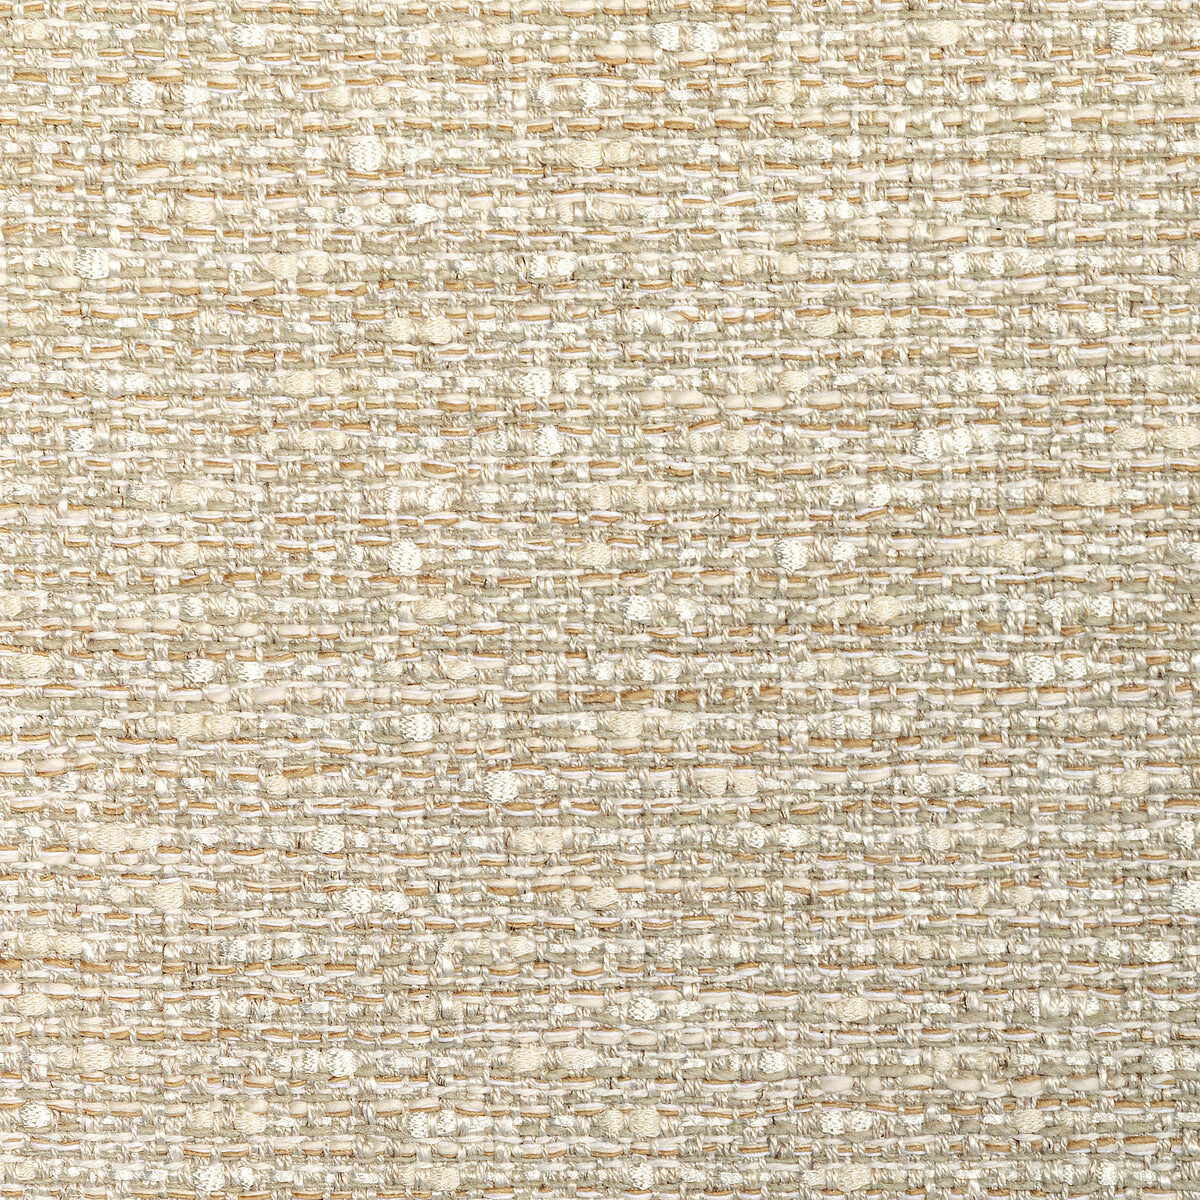 Kravet Couture fabric in 36616-16 color - pattern 36616.16.0 - by Kravet Couture in the Mabley Handler collection